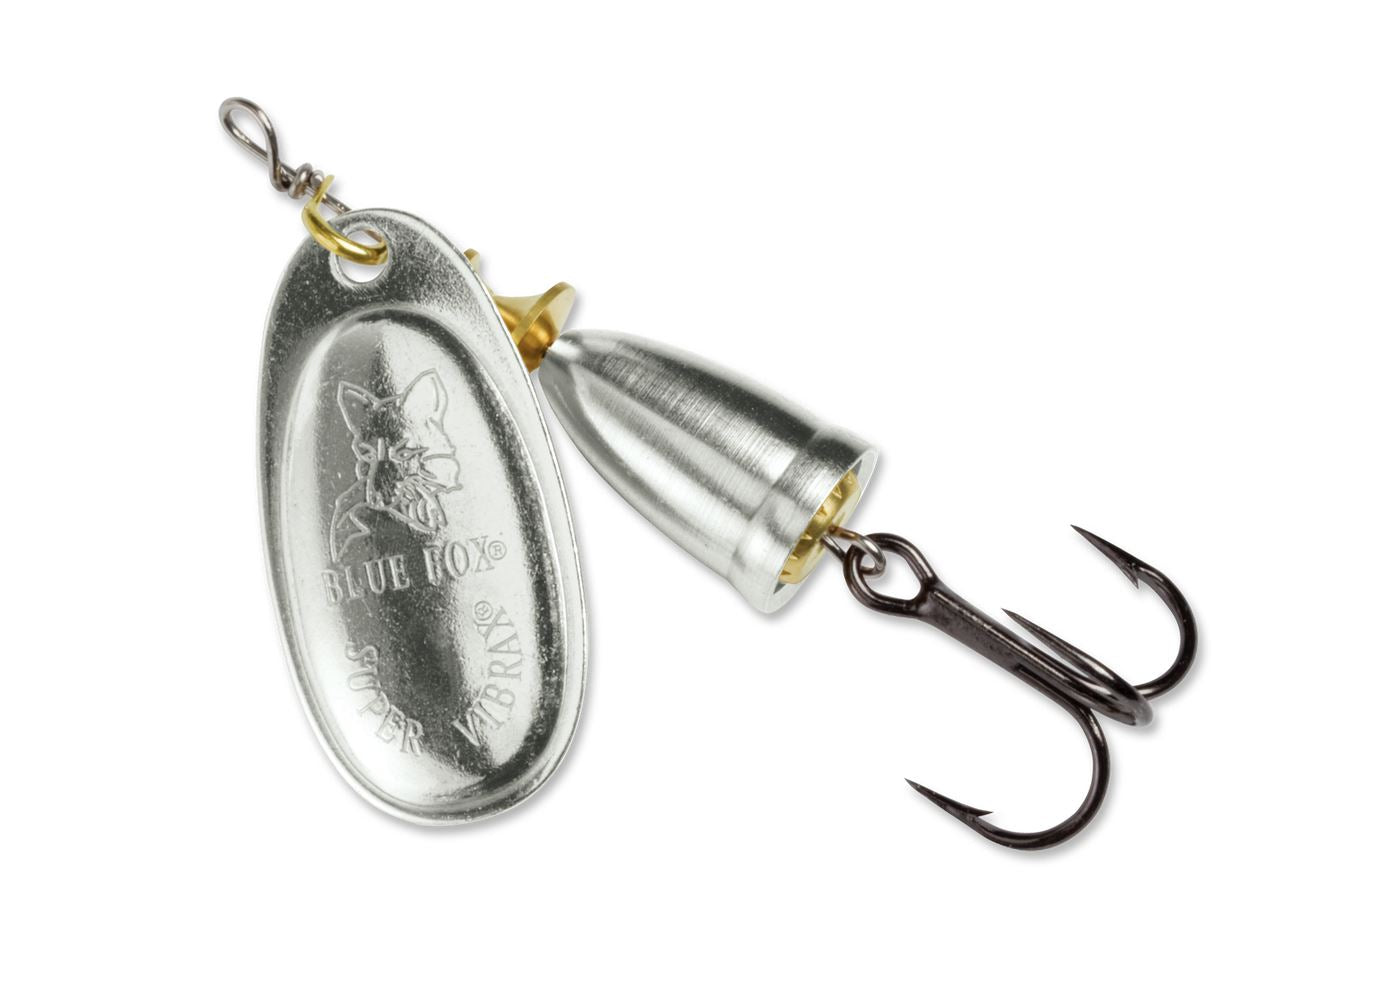 Blue Fox Classic Vibrax Inline Spinners – Tackle World